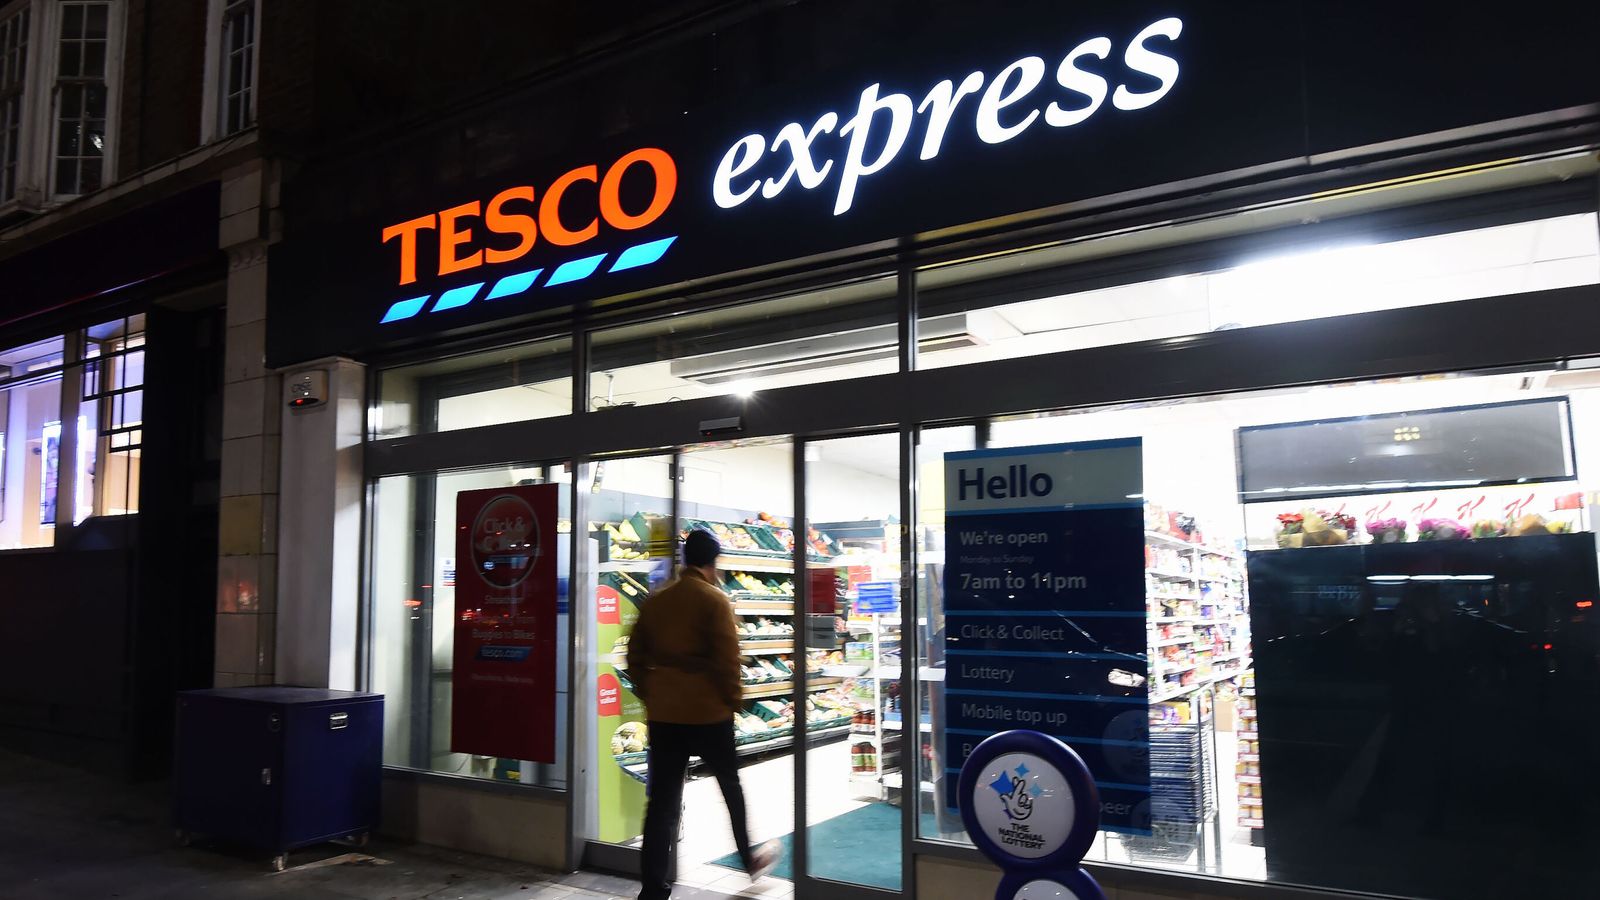 Shopping at convenience stores instead of bigger supermarkets could cost you an extra £800 a year